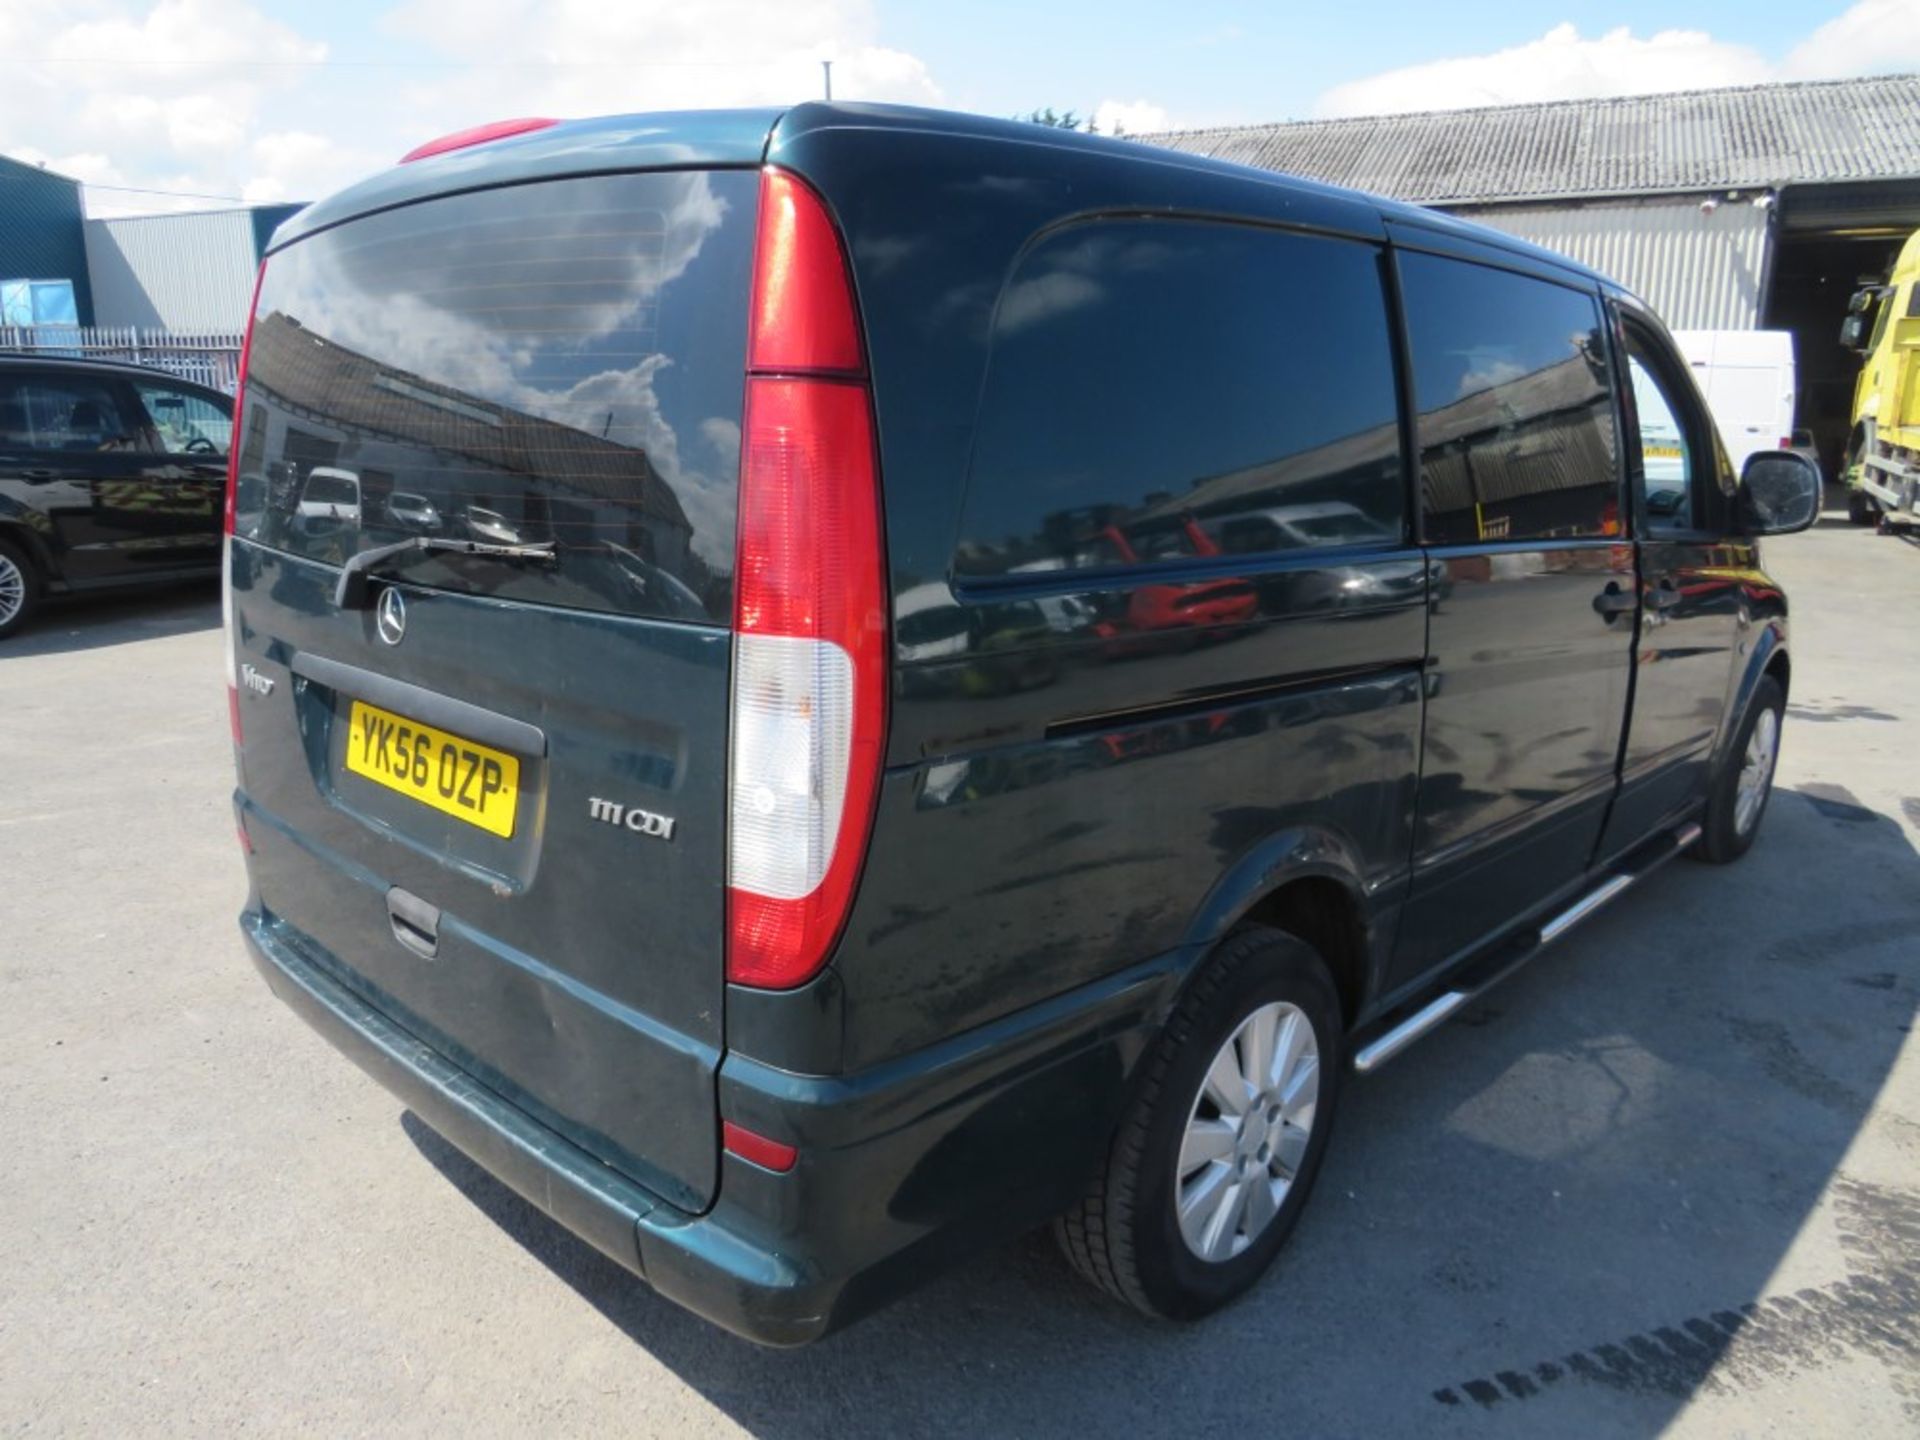 56 reg MERCEDES VITO 111 CDI LONG, 321099M NOT WARRANTED, V5 HERE, 2 FORMER KEEPERS [NO VAT] - Image 4 of 8